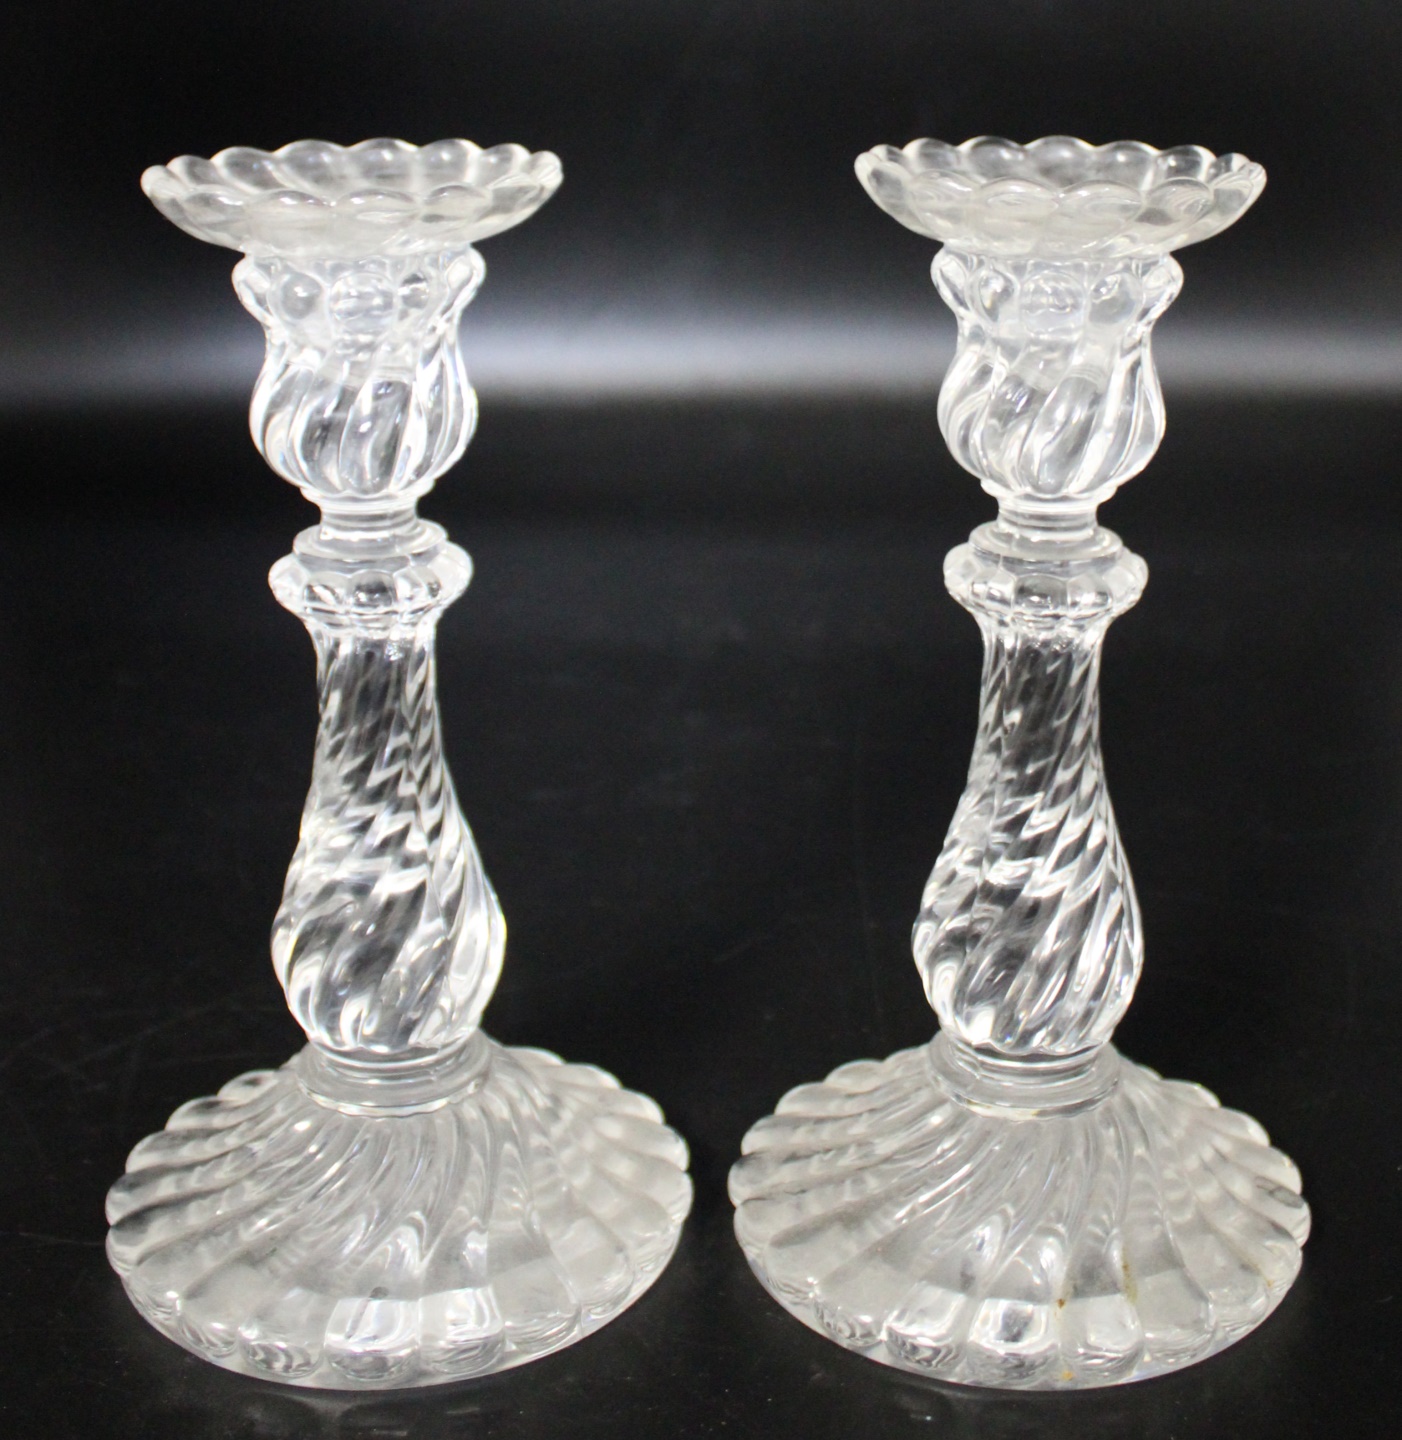 BACCARAT PAIR OF GLASS CANDLE 3b7e20